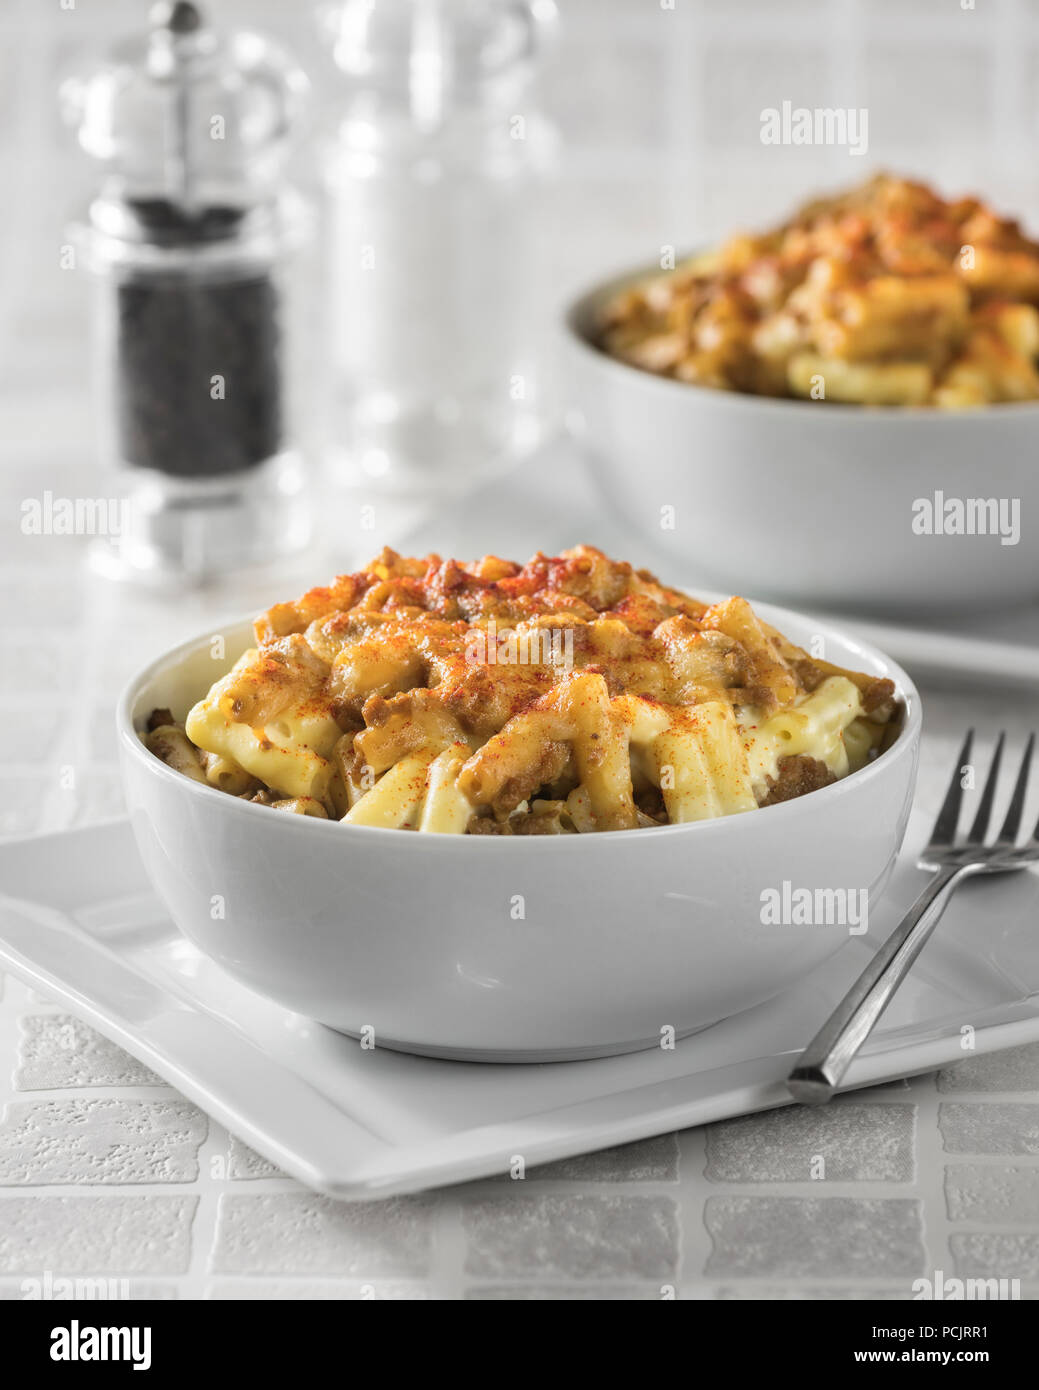 Beef mac and cheese. Minced beef and macaroni cheese. Stock Photo